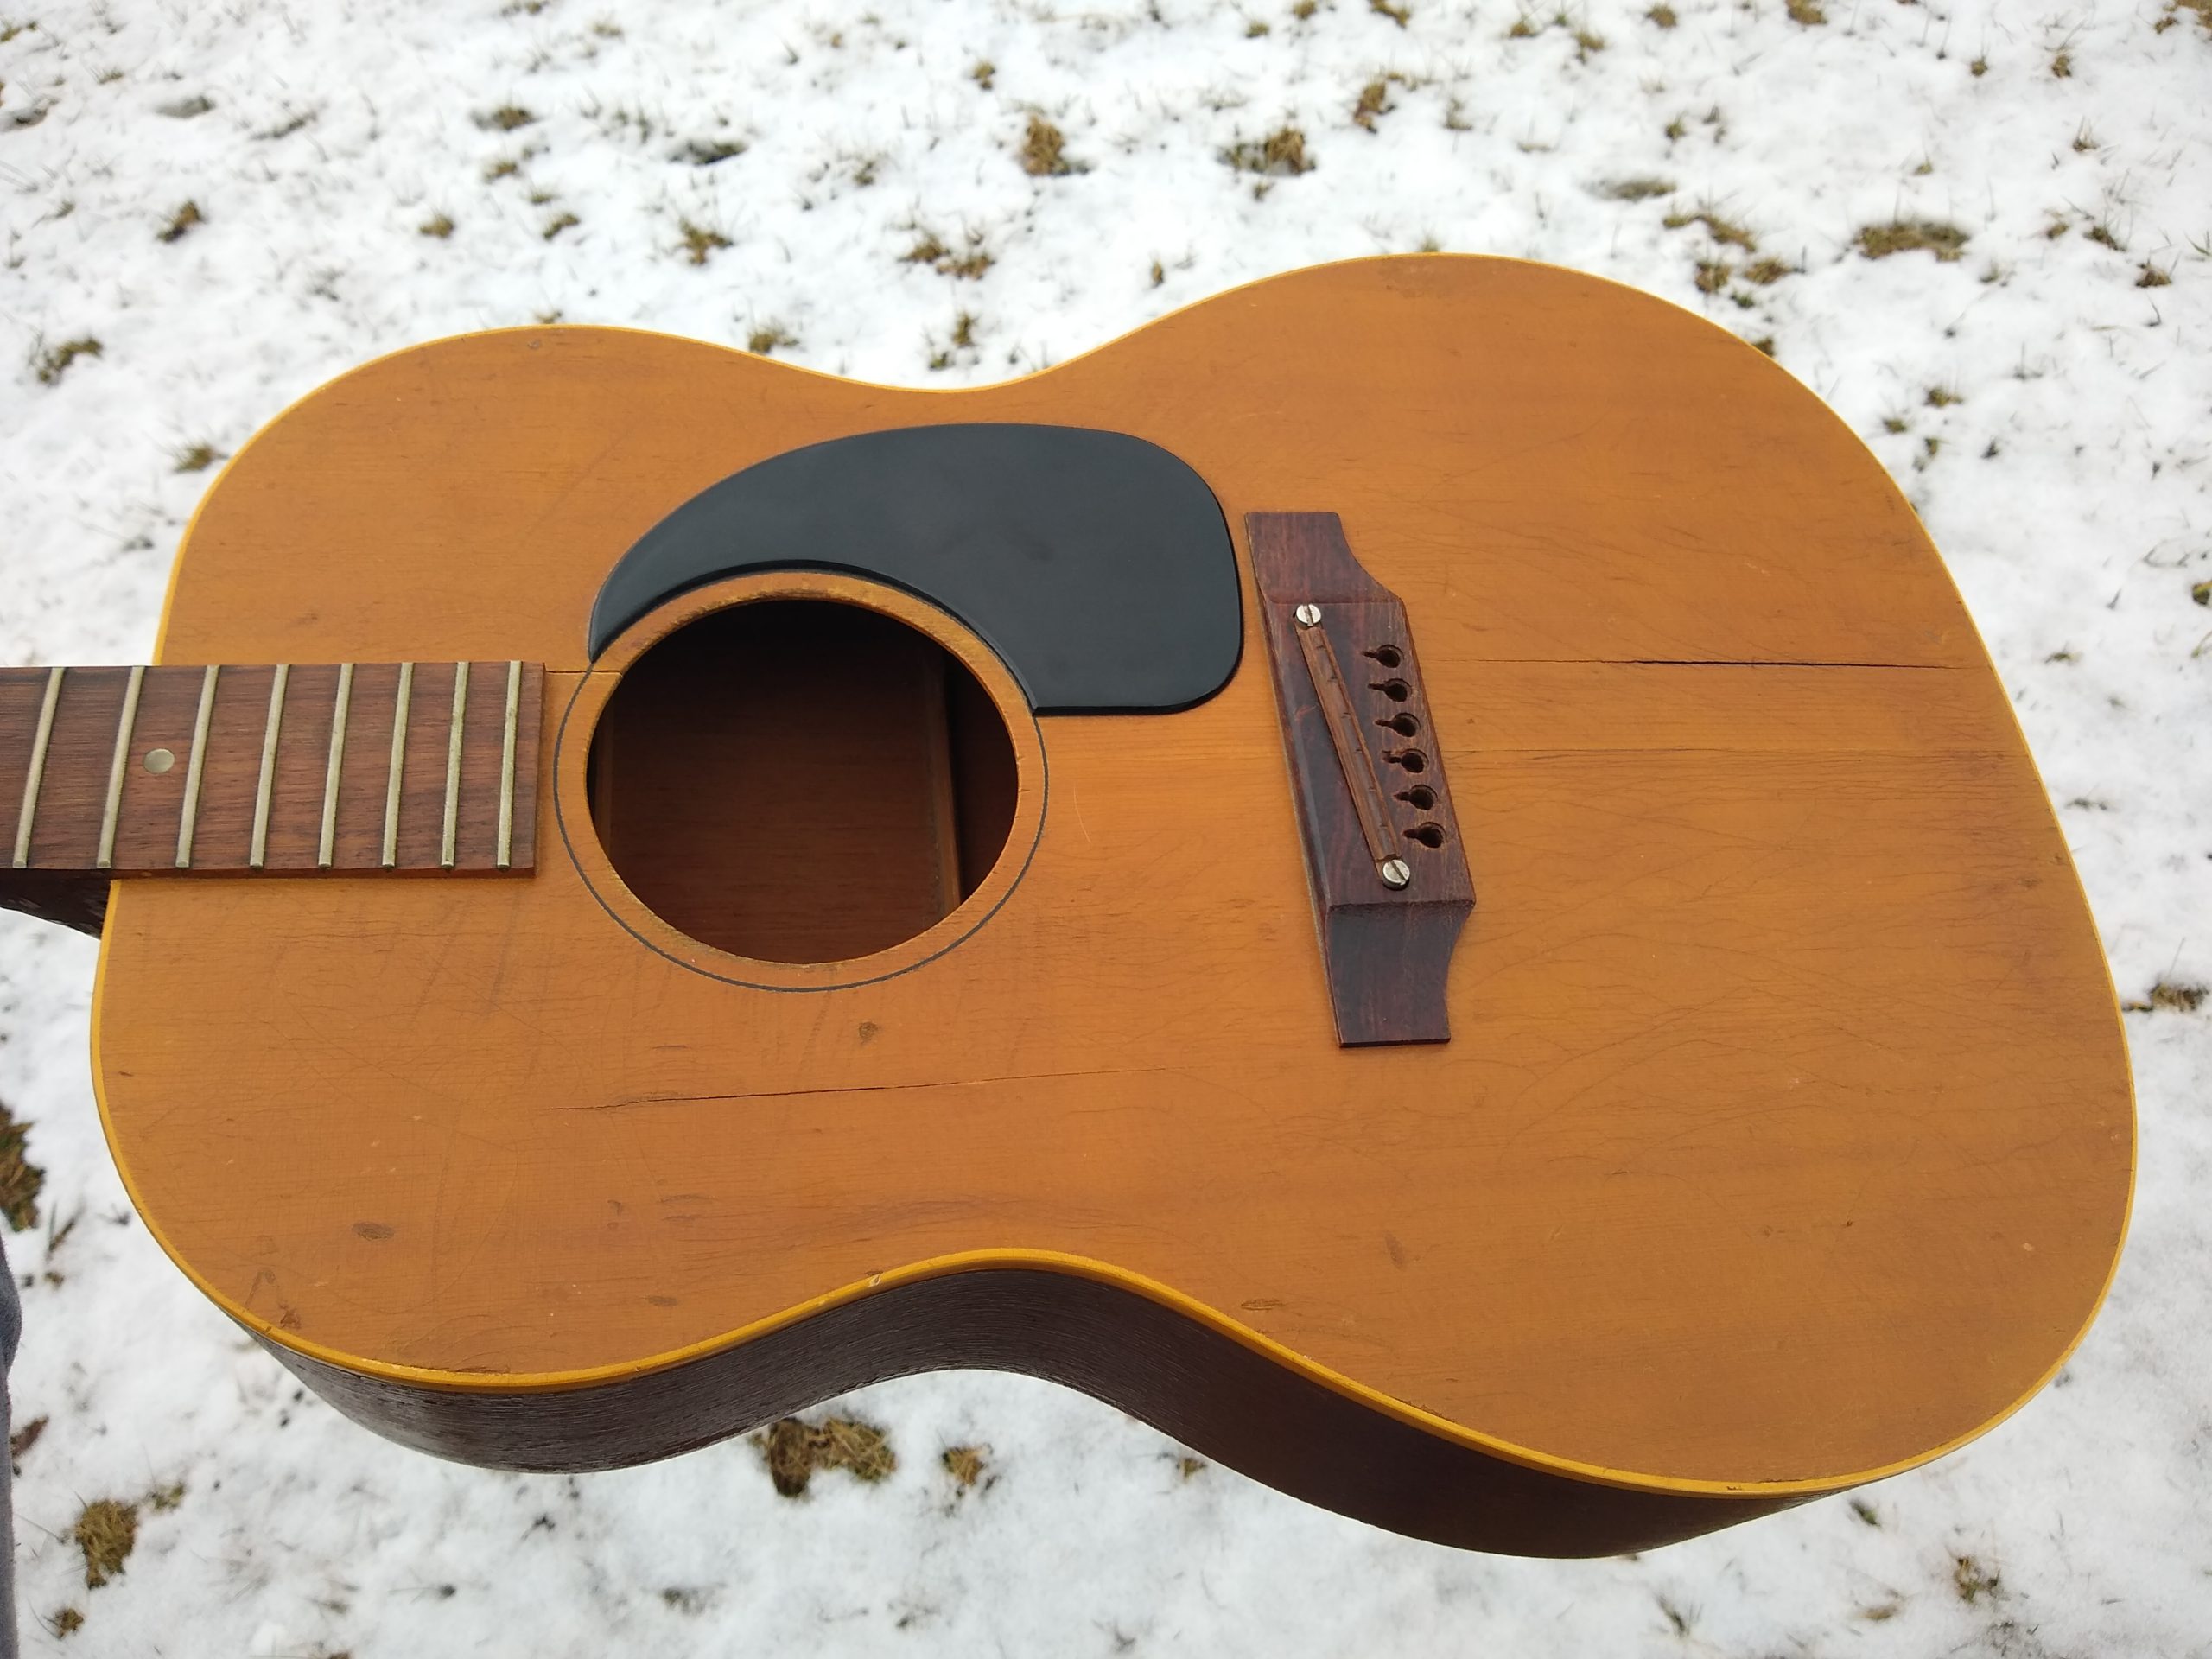 Repairing a vintage Gibson LG-0 from 1969